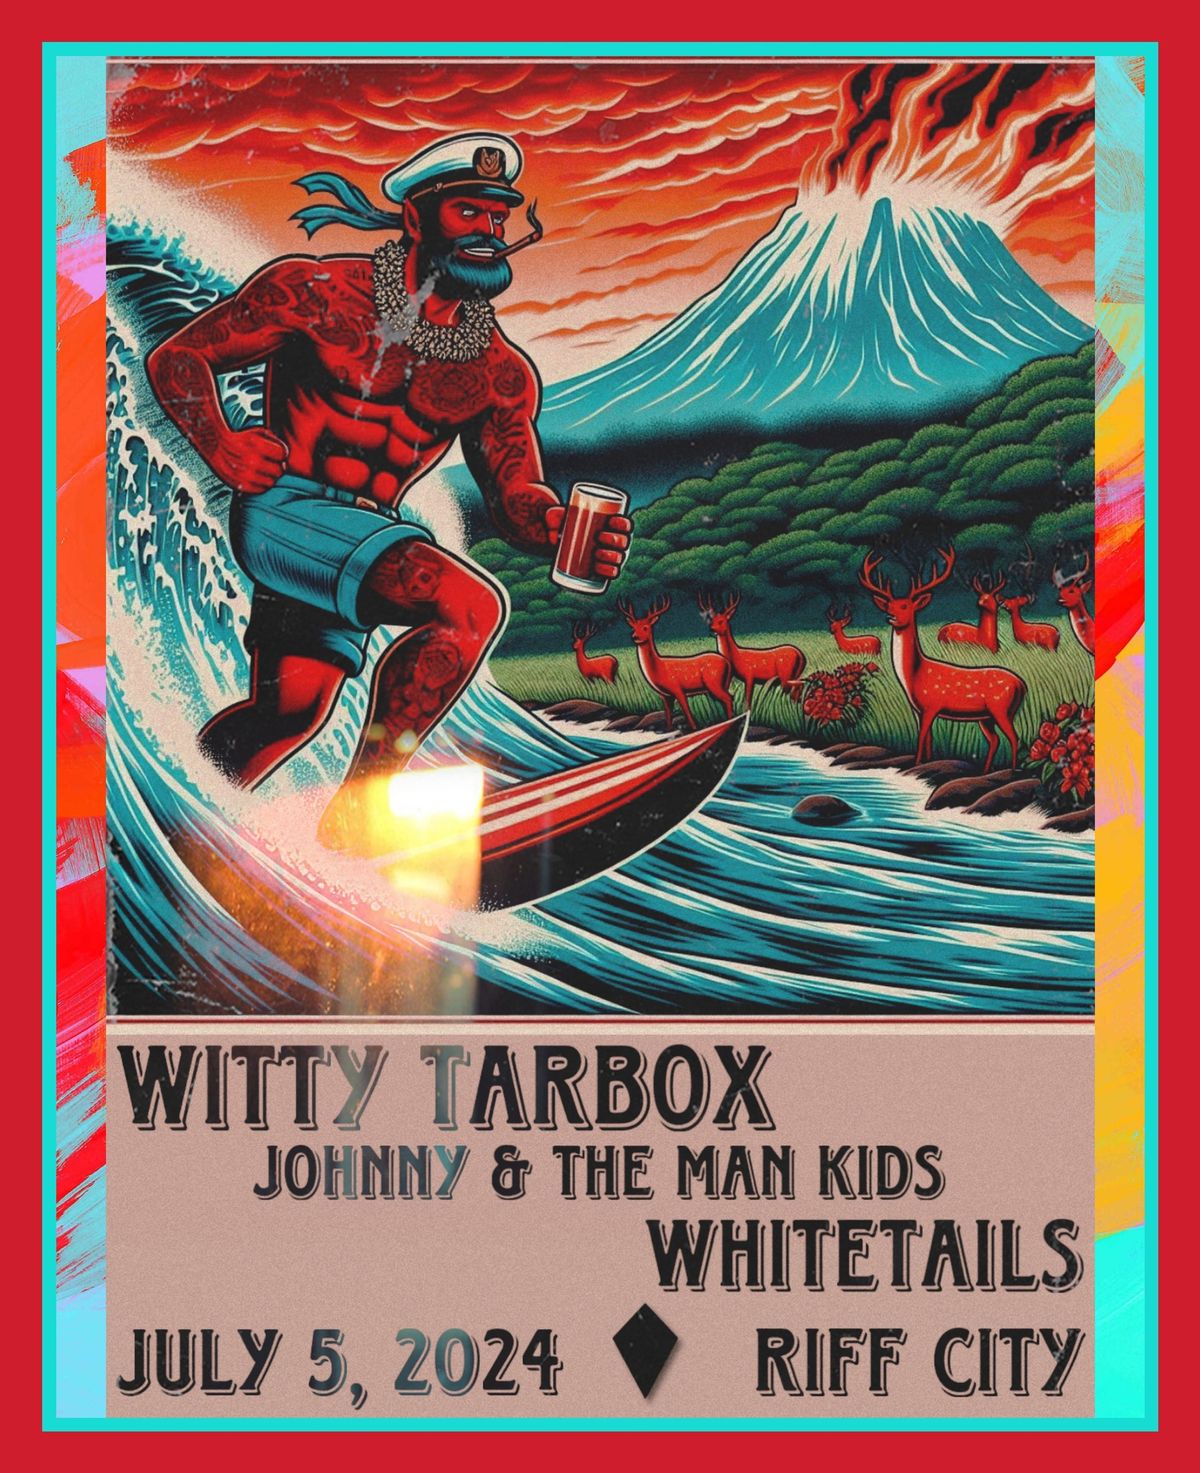 Witty Tarbox debut Riff City featuring Johnny & the Man Kids and Whitetails